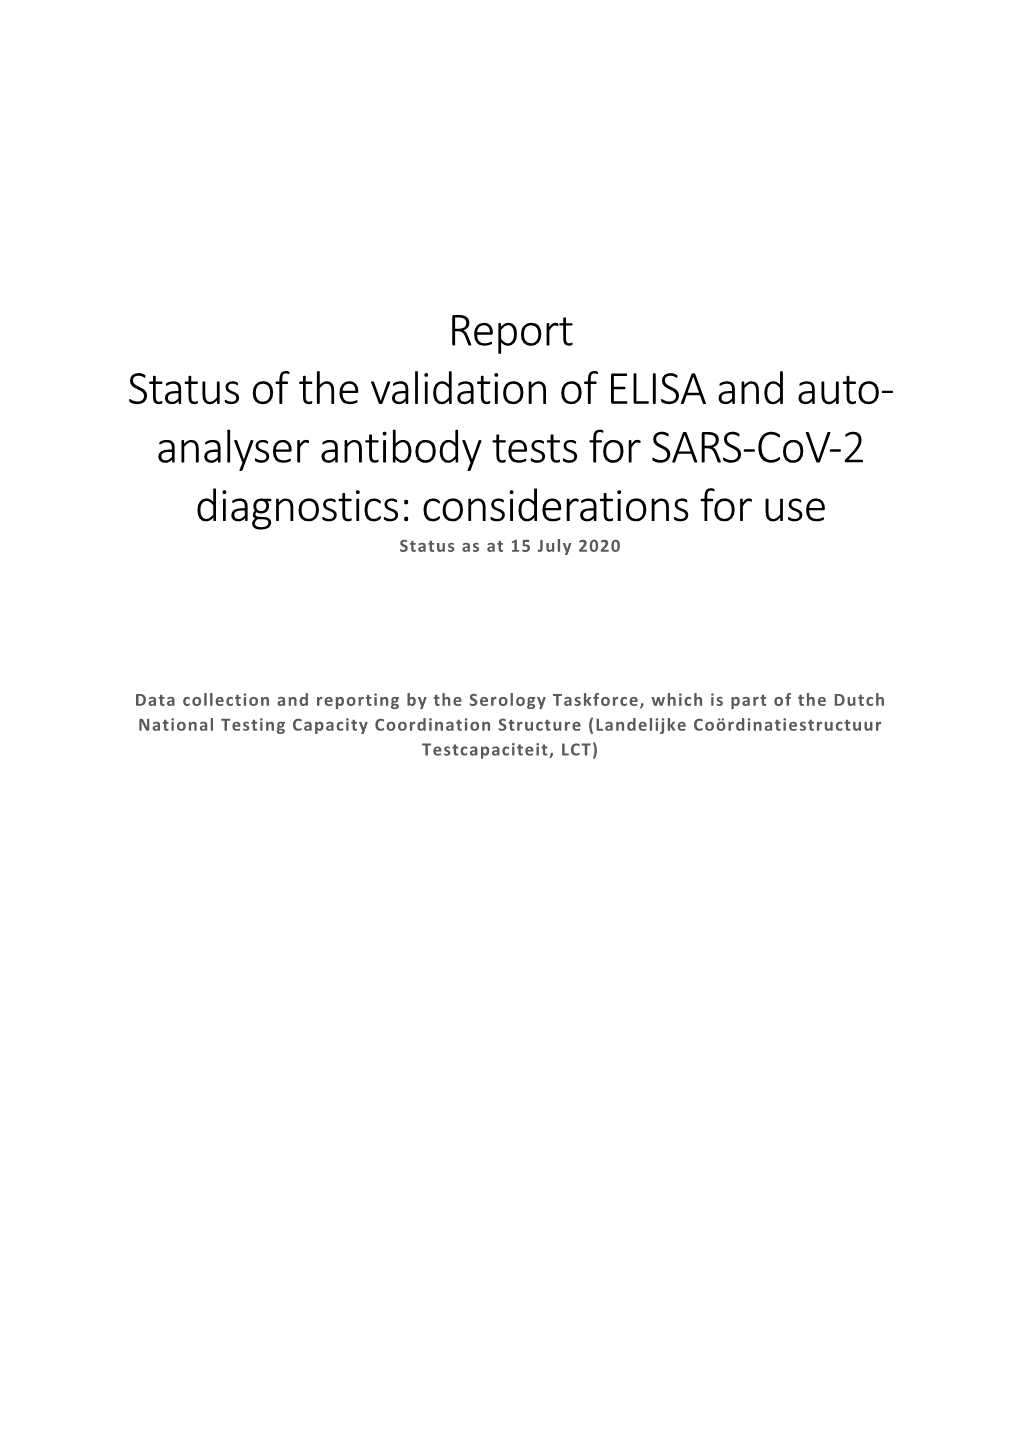 Report Status of the Validation of ELISA and Auto- Analyser Antibody Tests for SARS-Cov-2 Diagnostics: Considerations for Use Status As at 15 July 2020